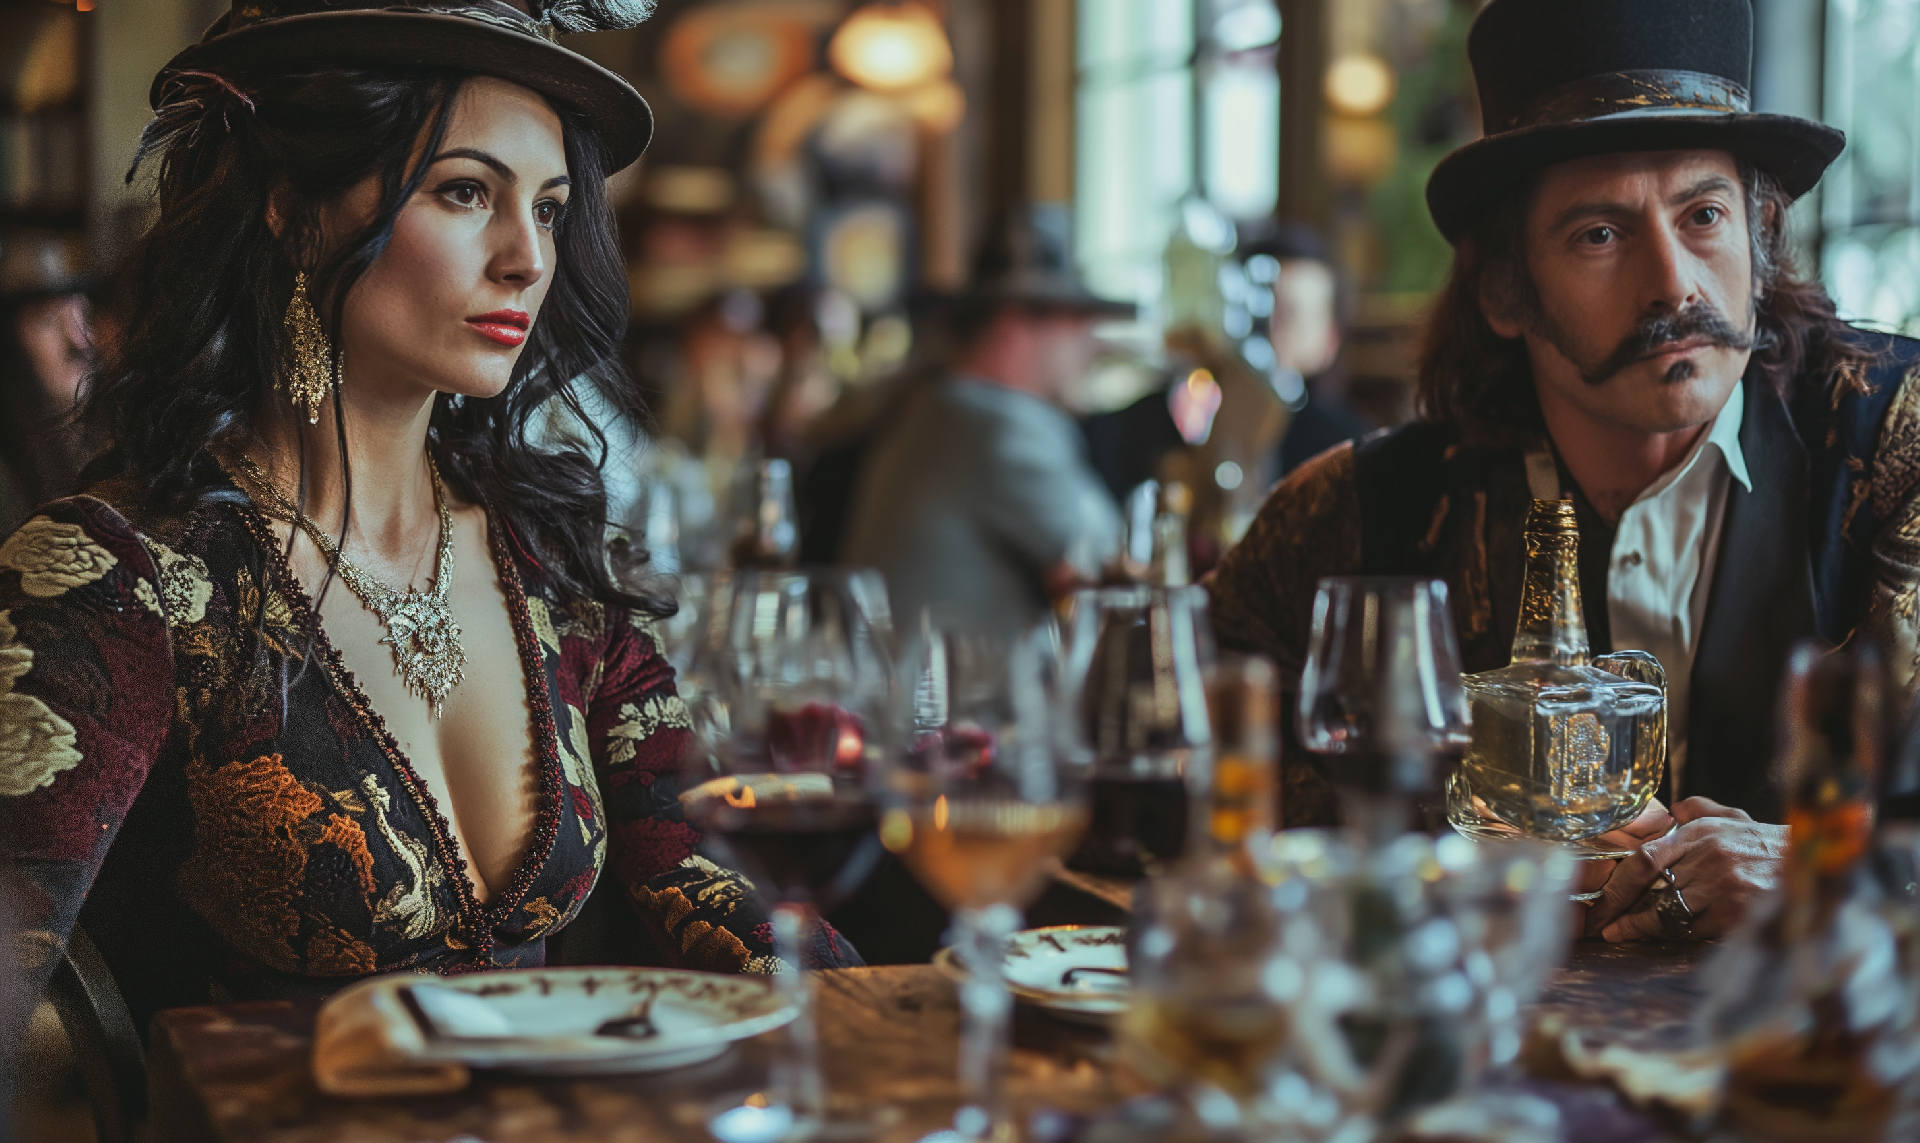 A detailed depiction of a wine tasting event, featuring people in gangster and exotic outfits, tasting Chenin Blanc and Sauvignon Blanc, in a style inspired by Frank Miller and Frank Frazetta.